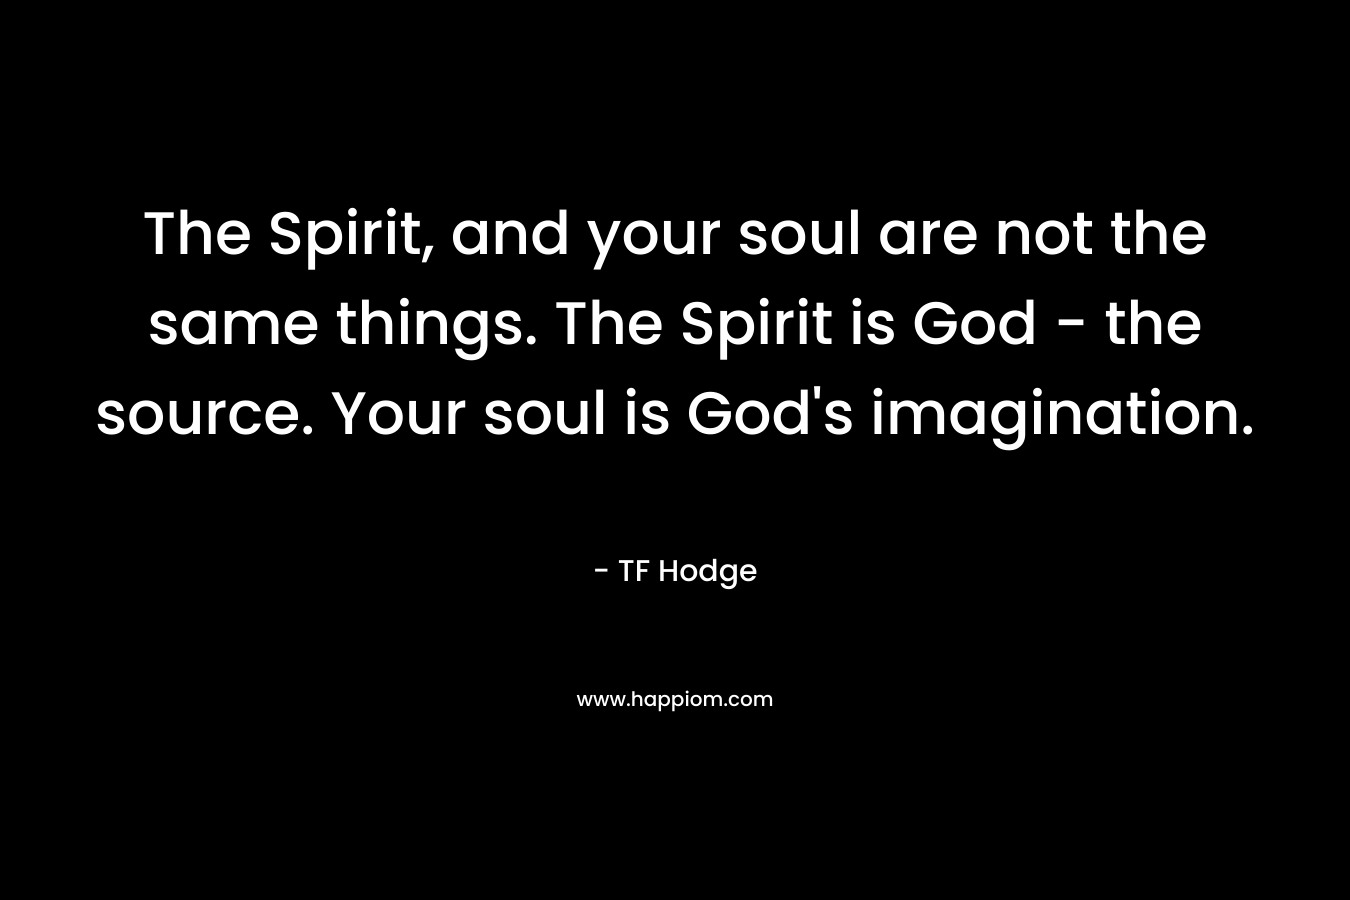 The Spirit, and your soul are not the same things. The Spirit is God - the source. Your soul is God's imagination.